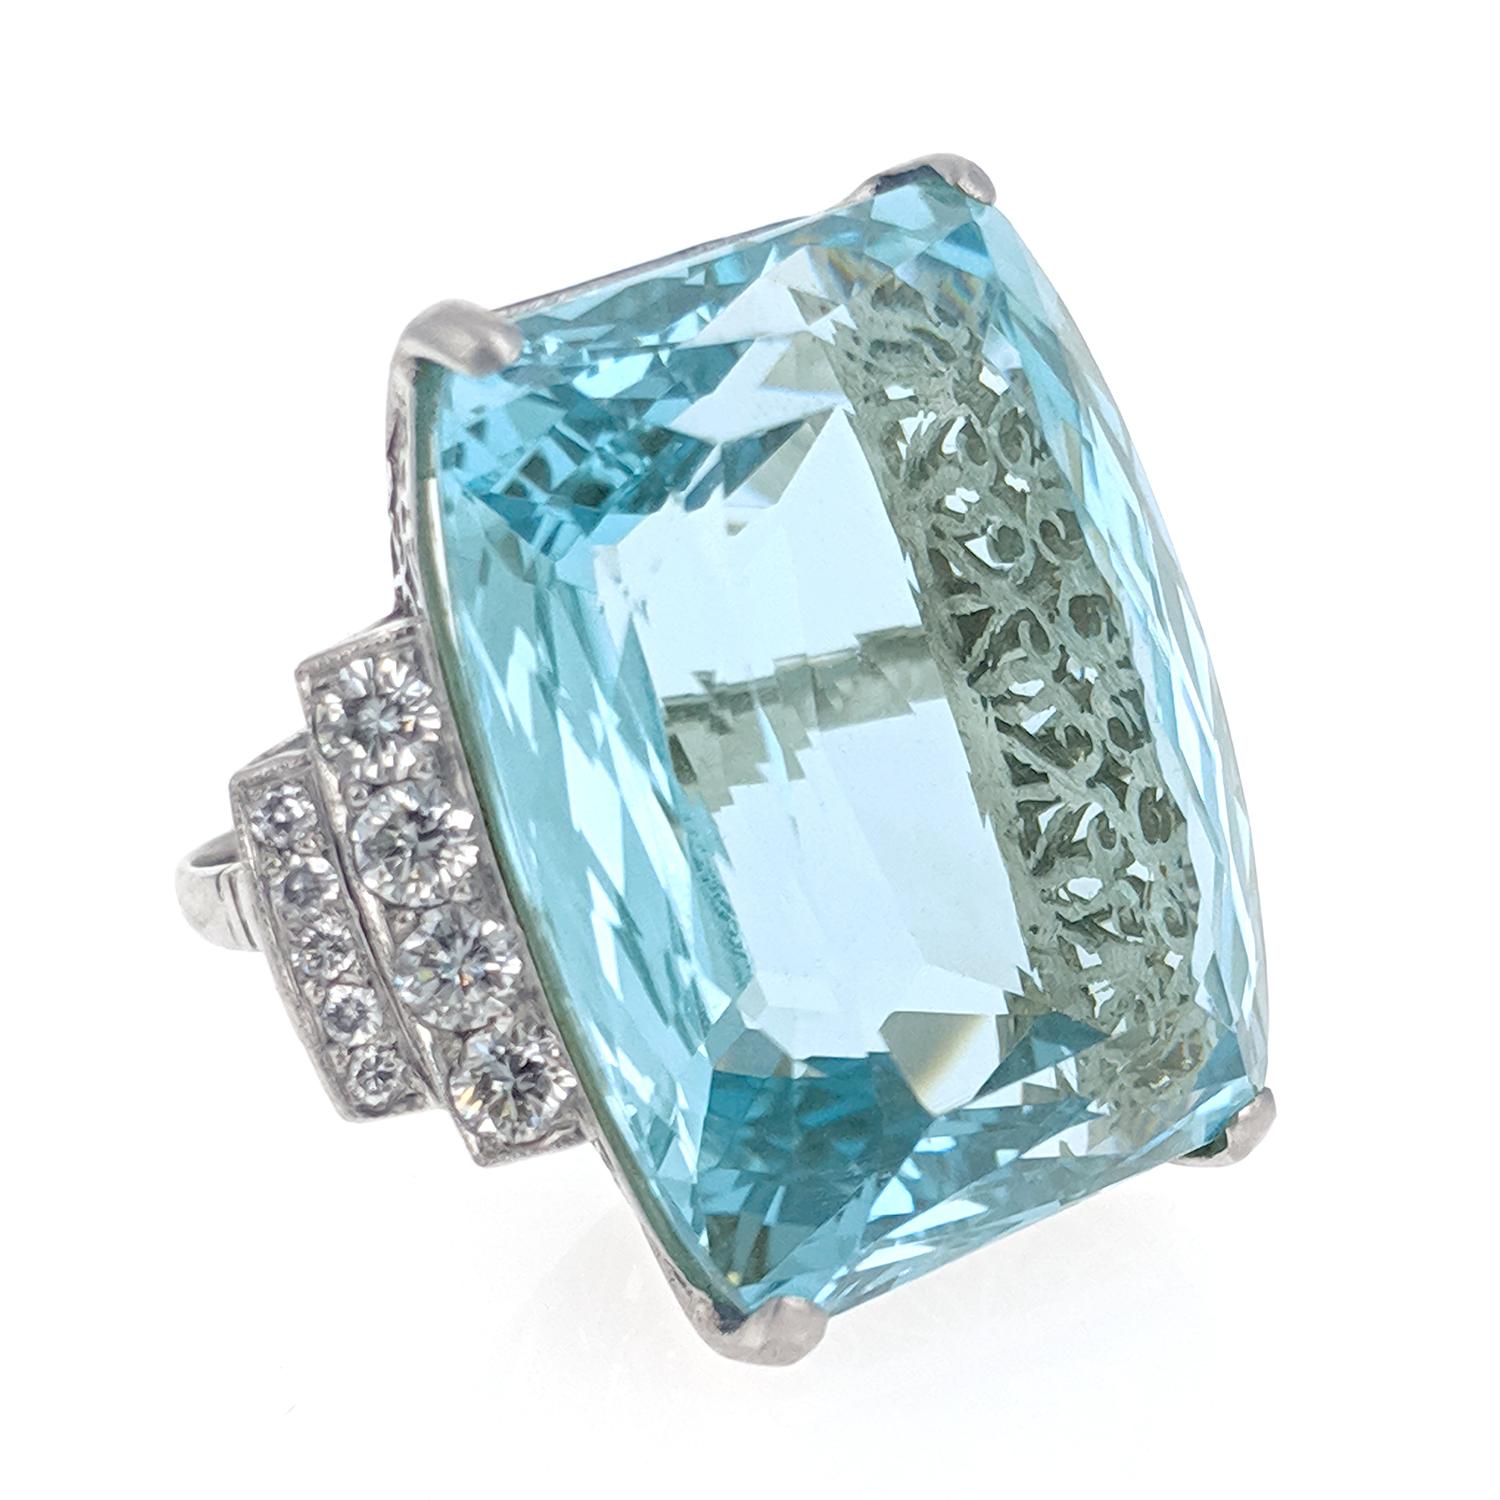 This stunning ring centers upon a mixed cut aquamarine weighing approximately 48 carats and is accented by a double line of round brilliant-cut diamonds weighing approximately 1 carat. The ring is expertly crafted in platinum with beautiful open